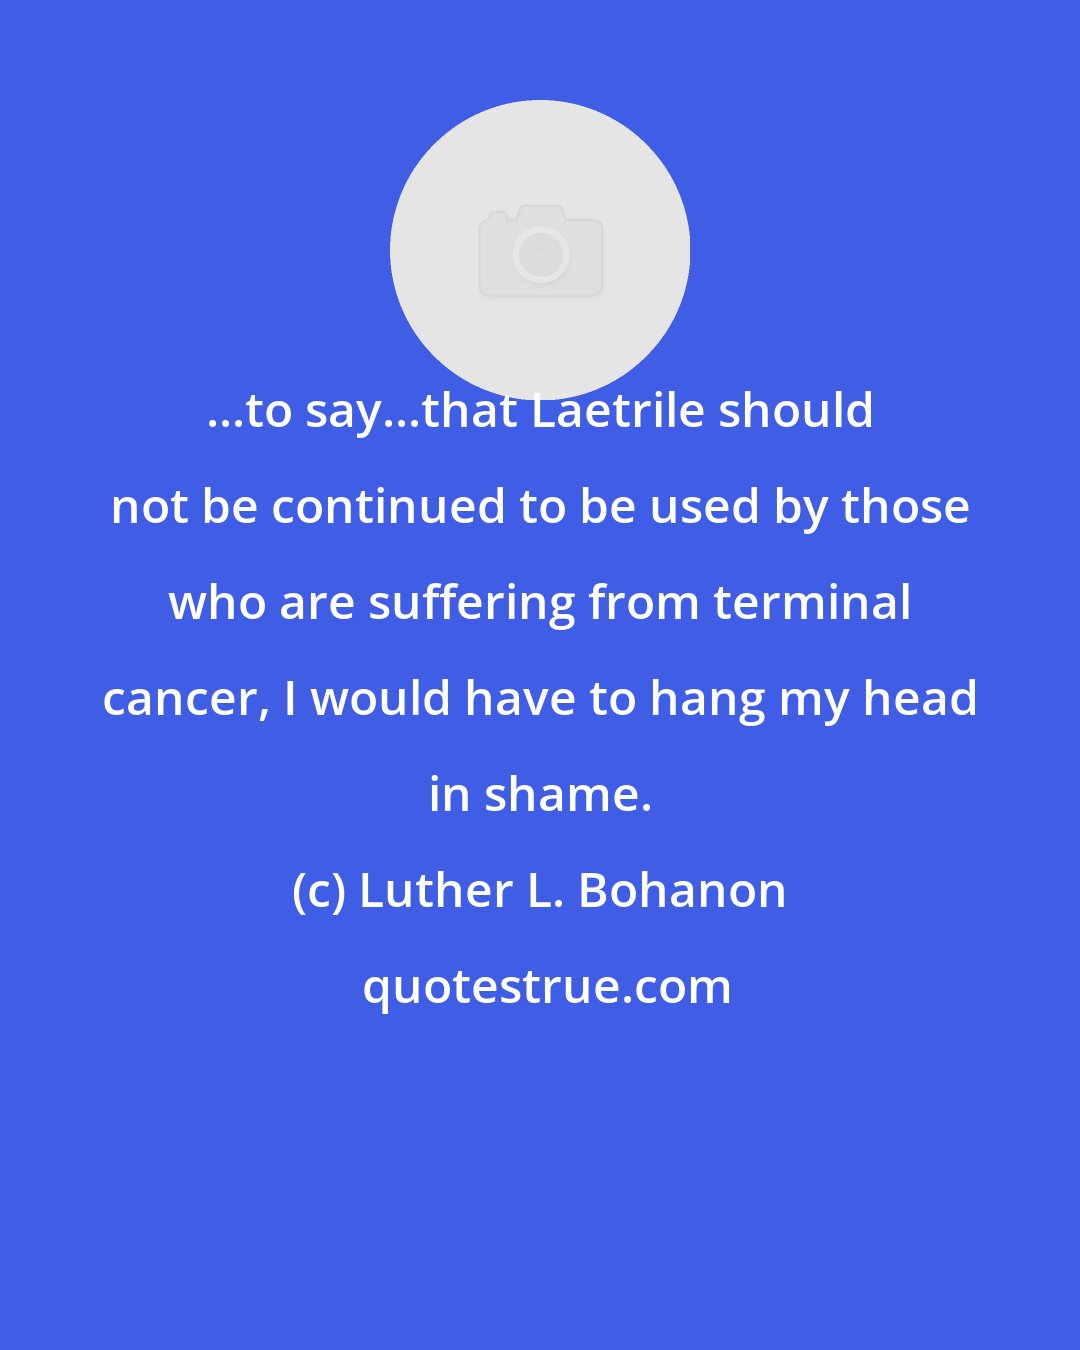 Luther L. Bohanon: ...to say...that Laetrile should not be continued to be used by those who are suffering from terminal cancer, I would have to hang my head in shame.